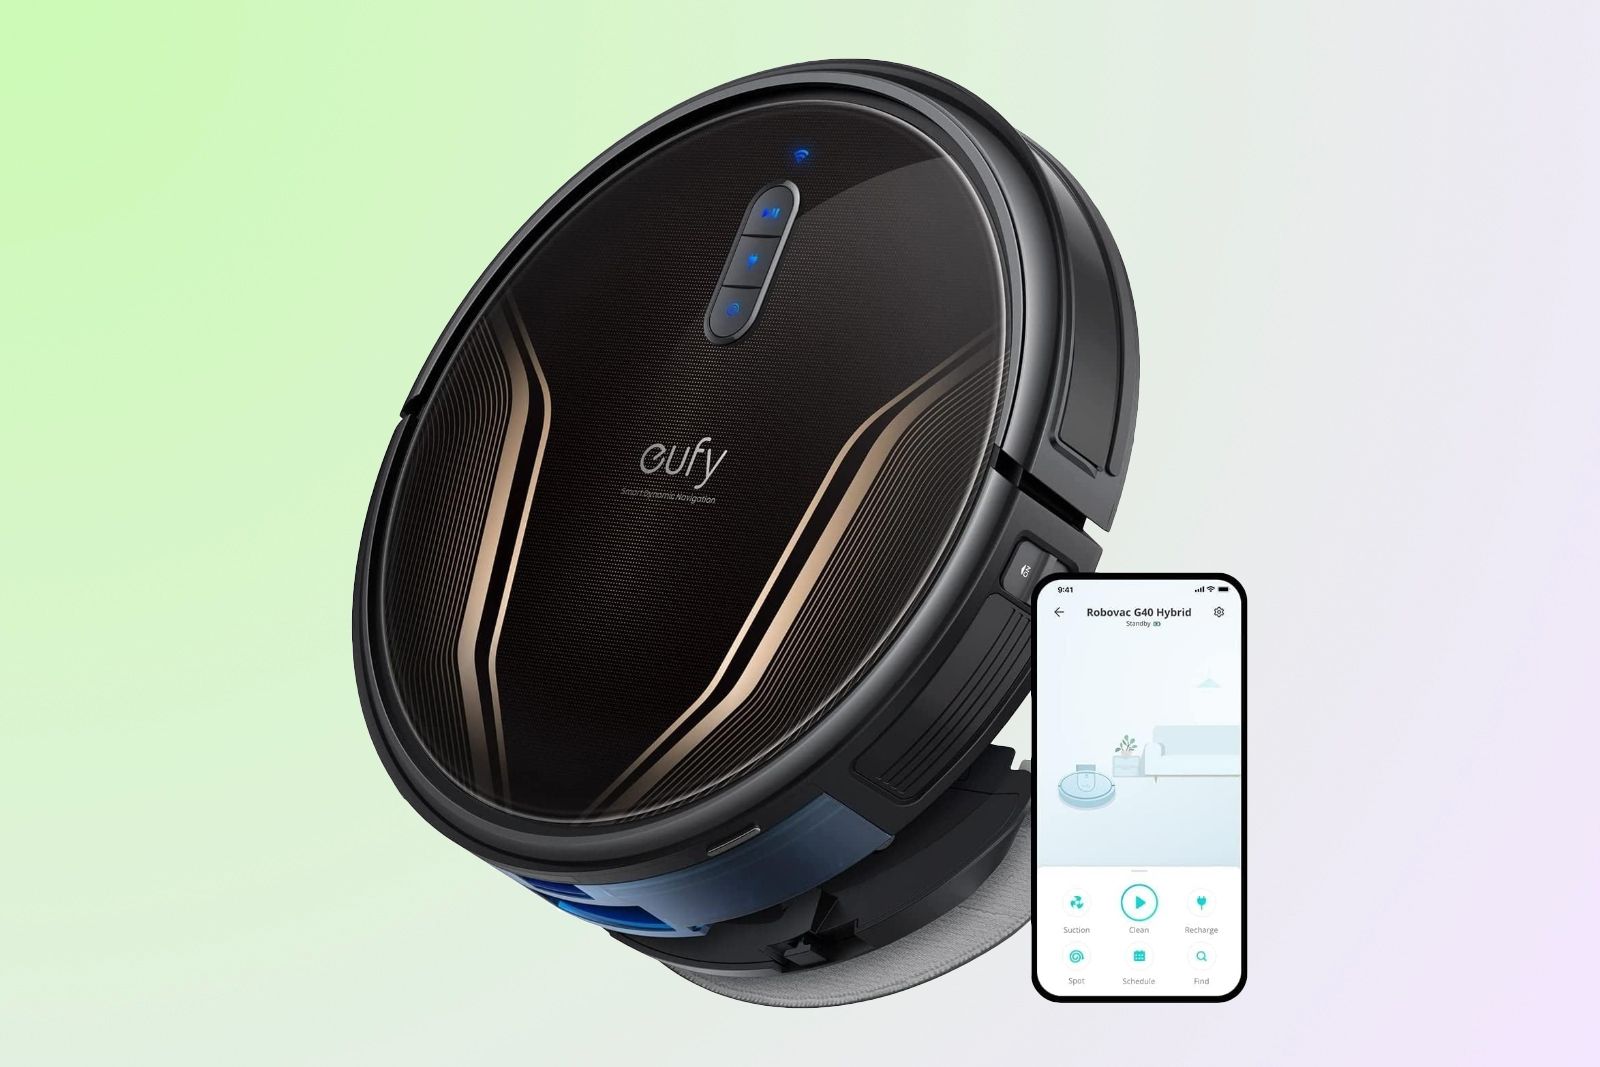 The Eufy Clean G40 Hybrid robot vacuum on its side next to a smartphone.